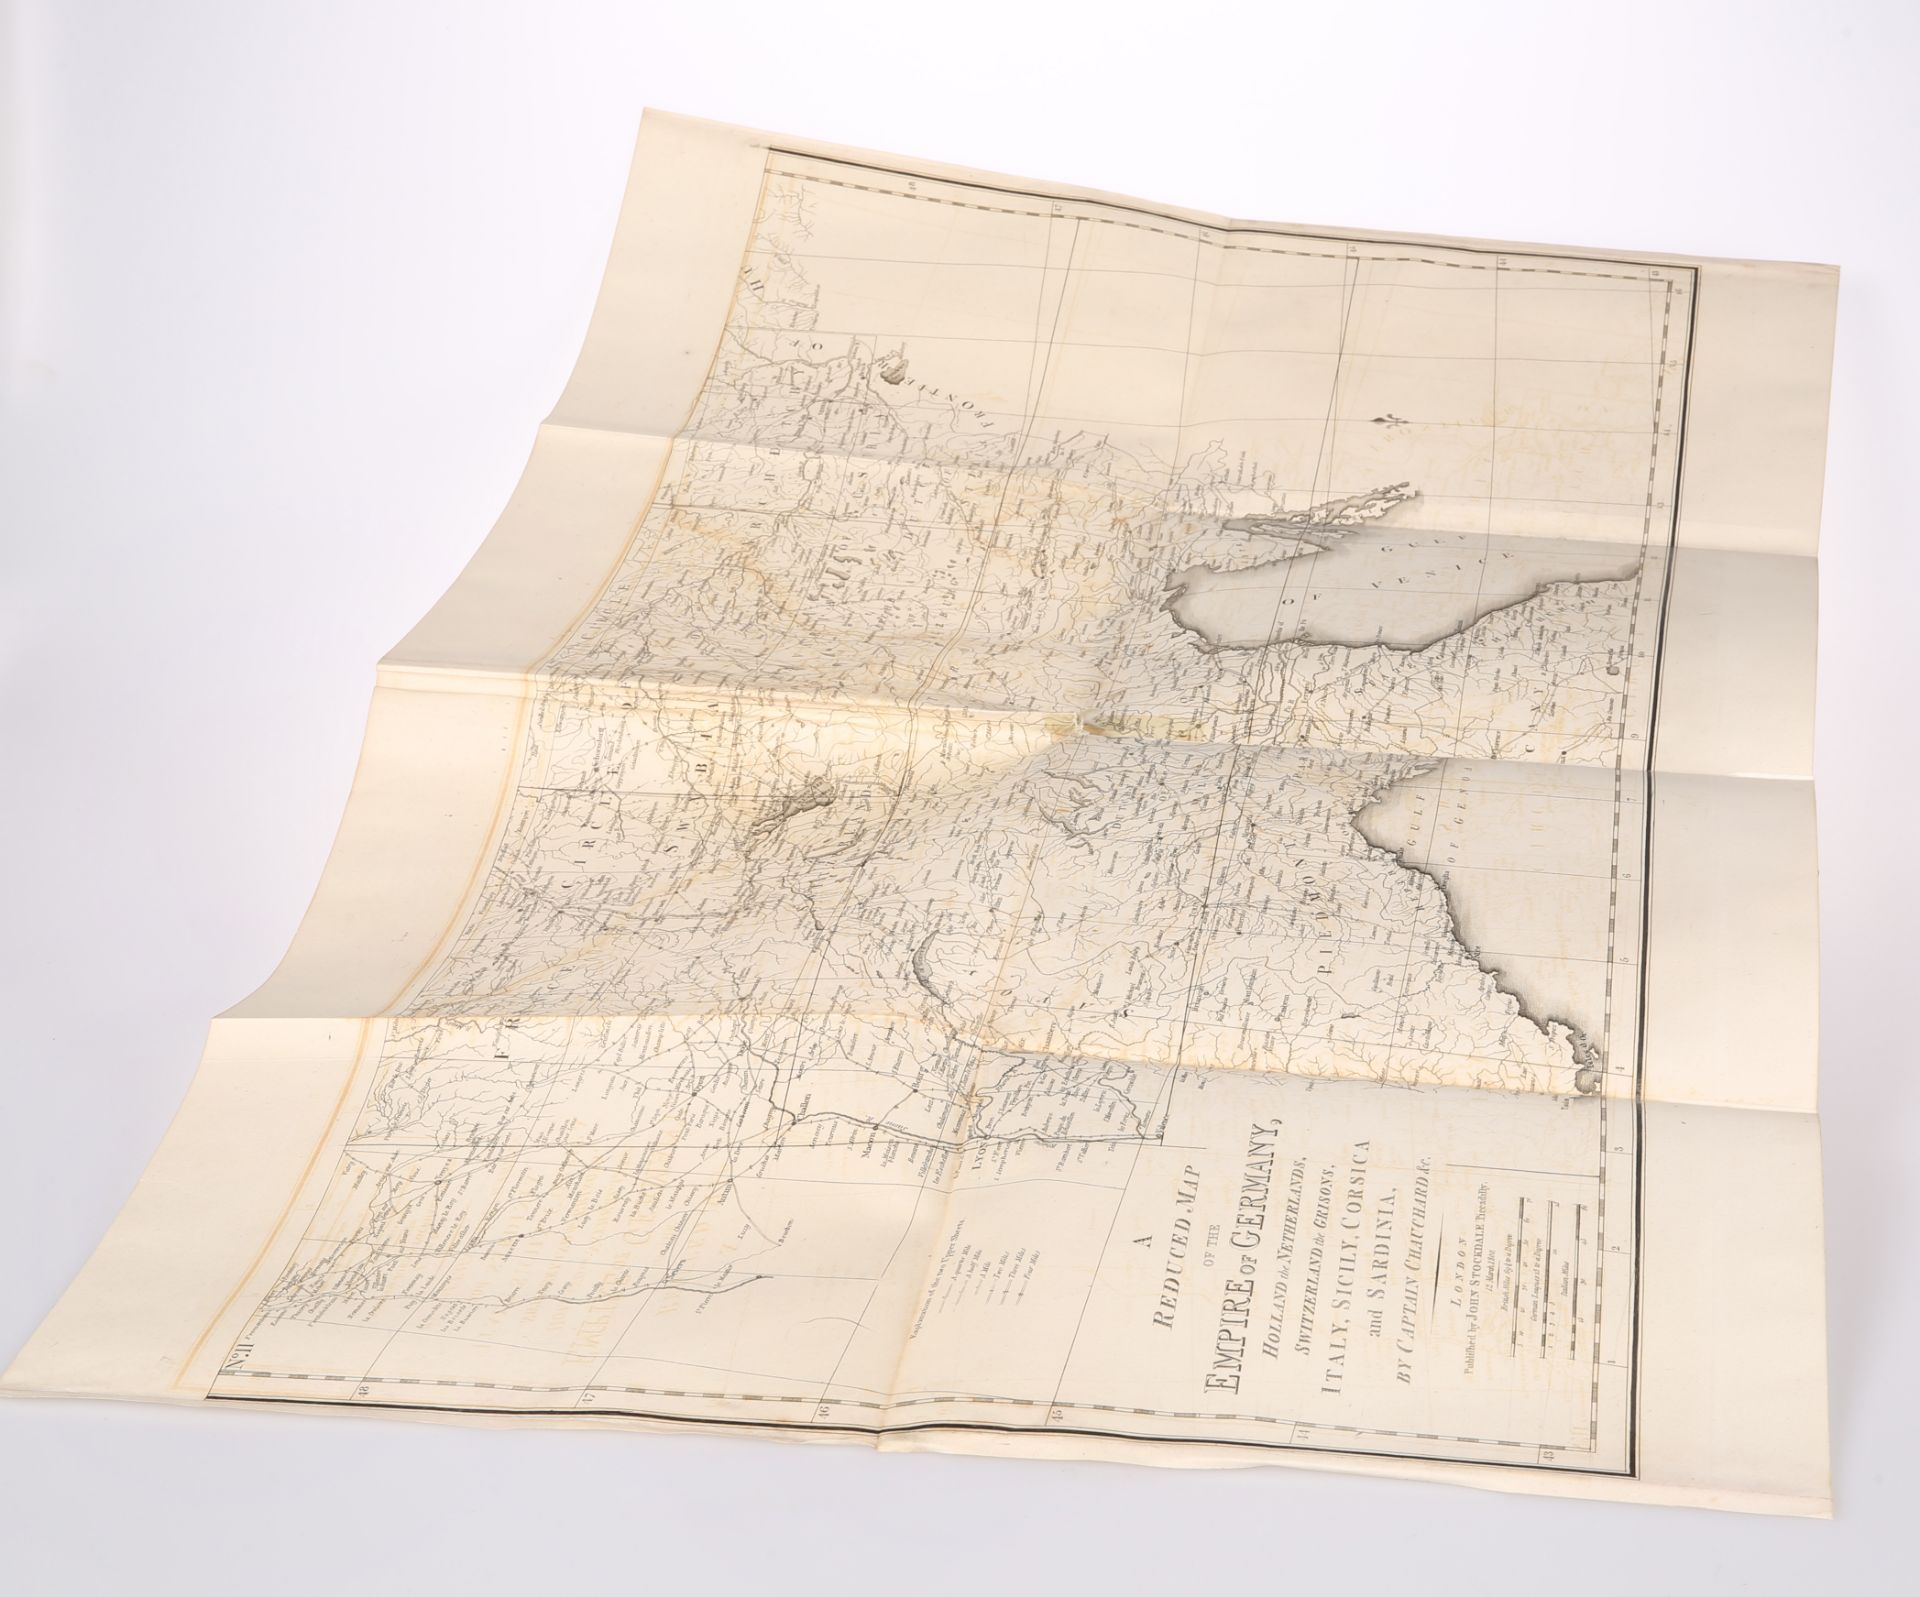 STOCKDALE (JOHN), GEOGRAPHICAL DESCRIPTION OF EMPIRE, 1800. - Image 2 of 2